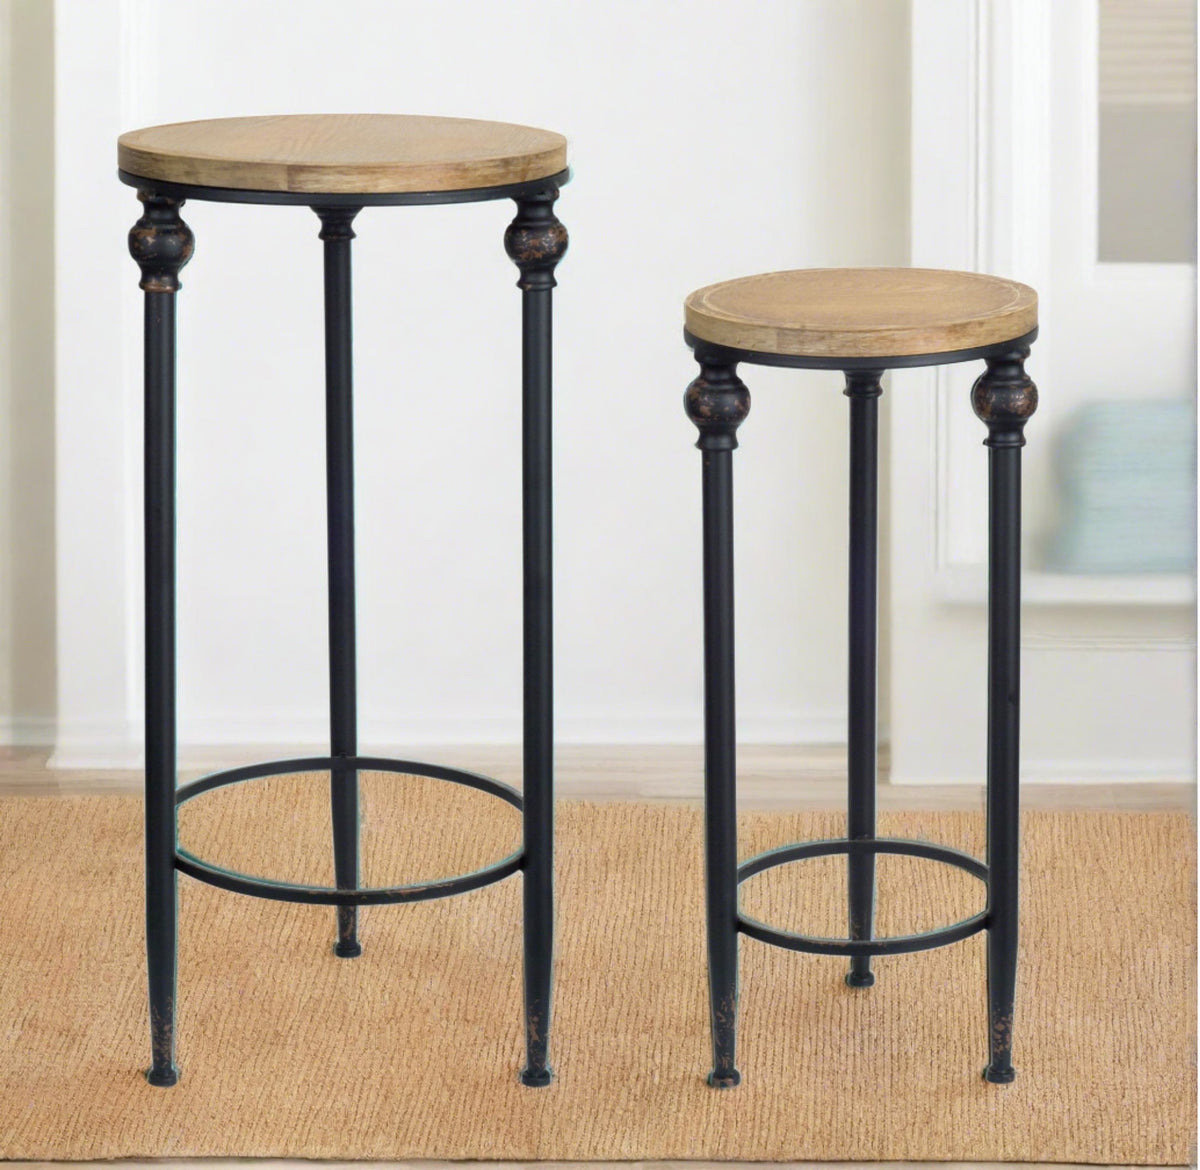 Set of 2 Plant Stands, Side Tables